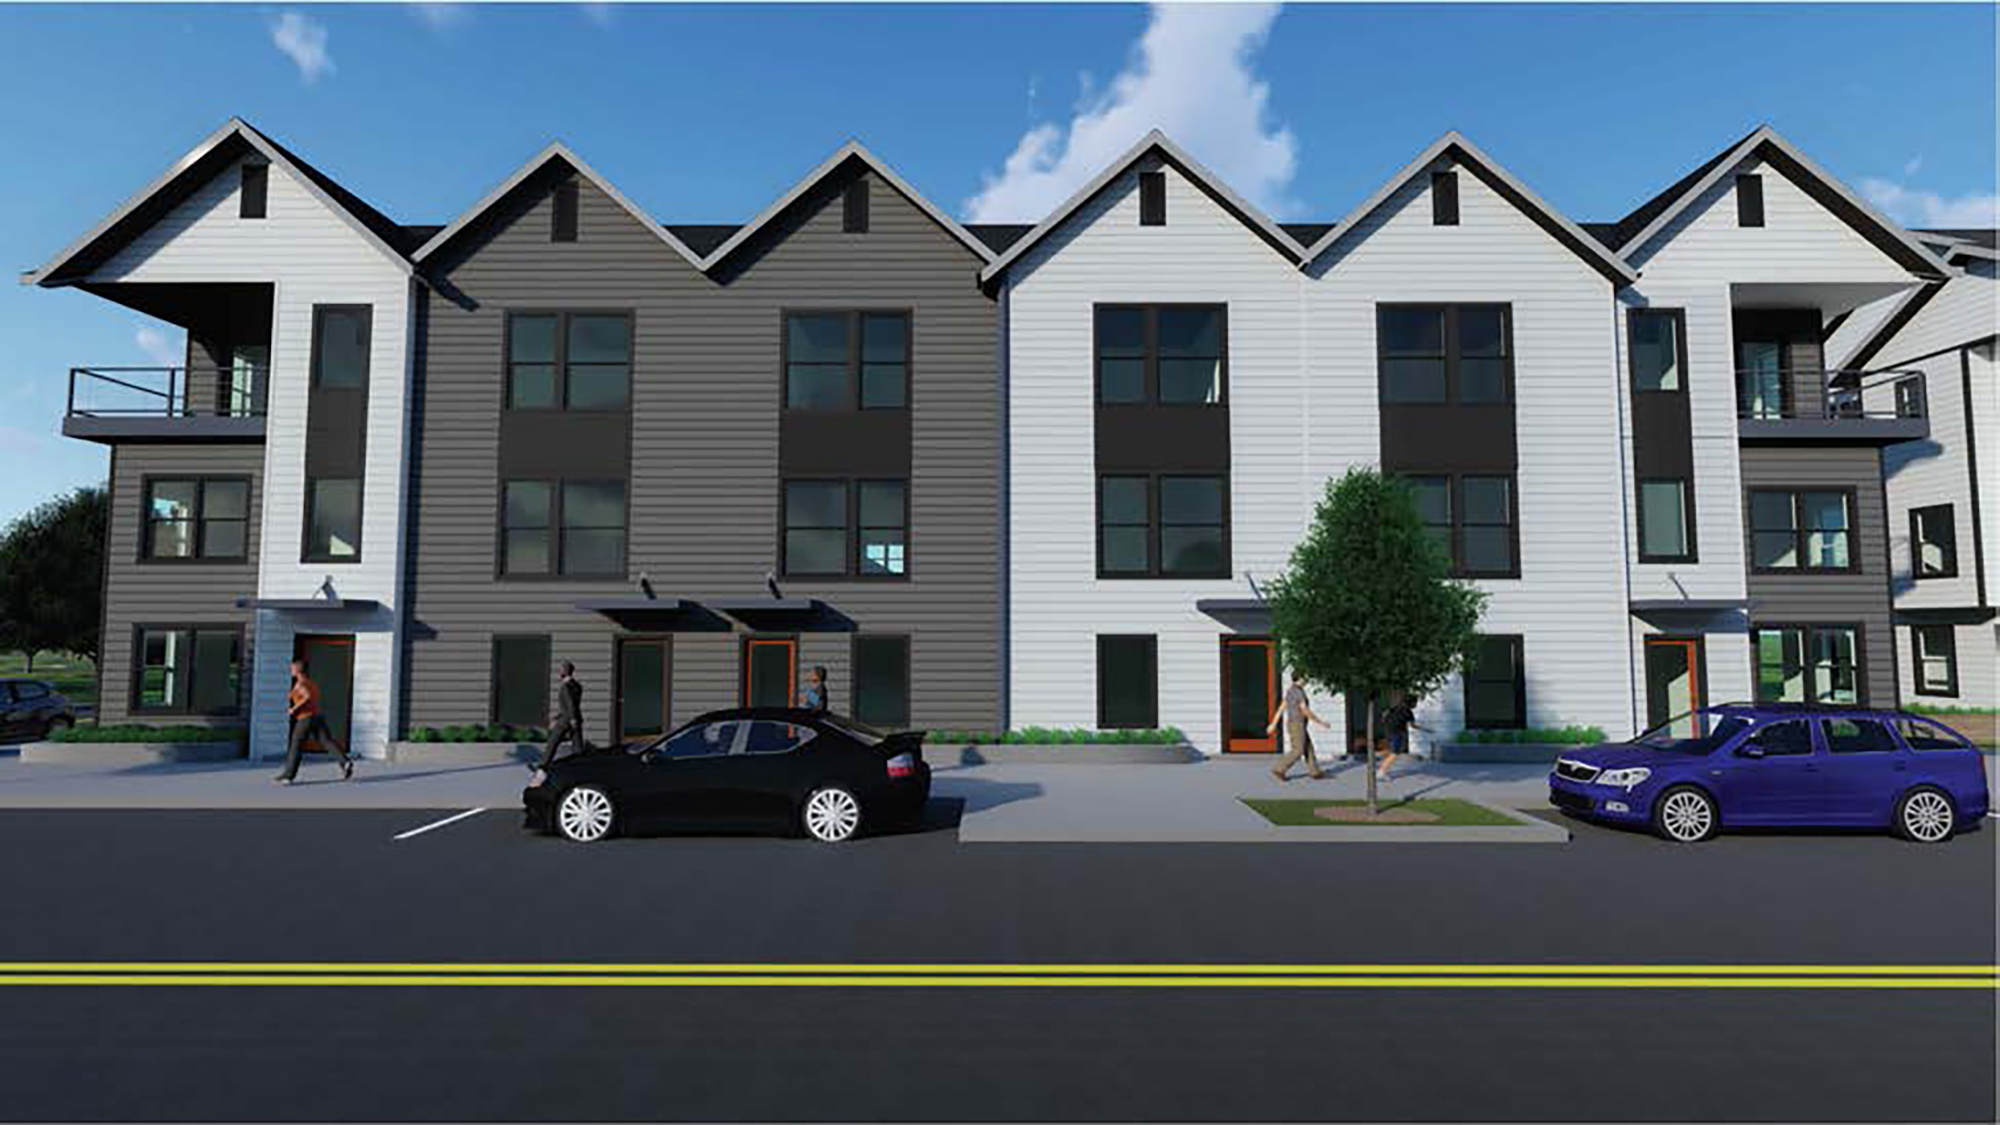 JWB Real Estate Capital LLC and Corner Lot Development Group are seeking to build the town houses.